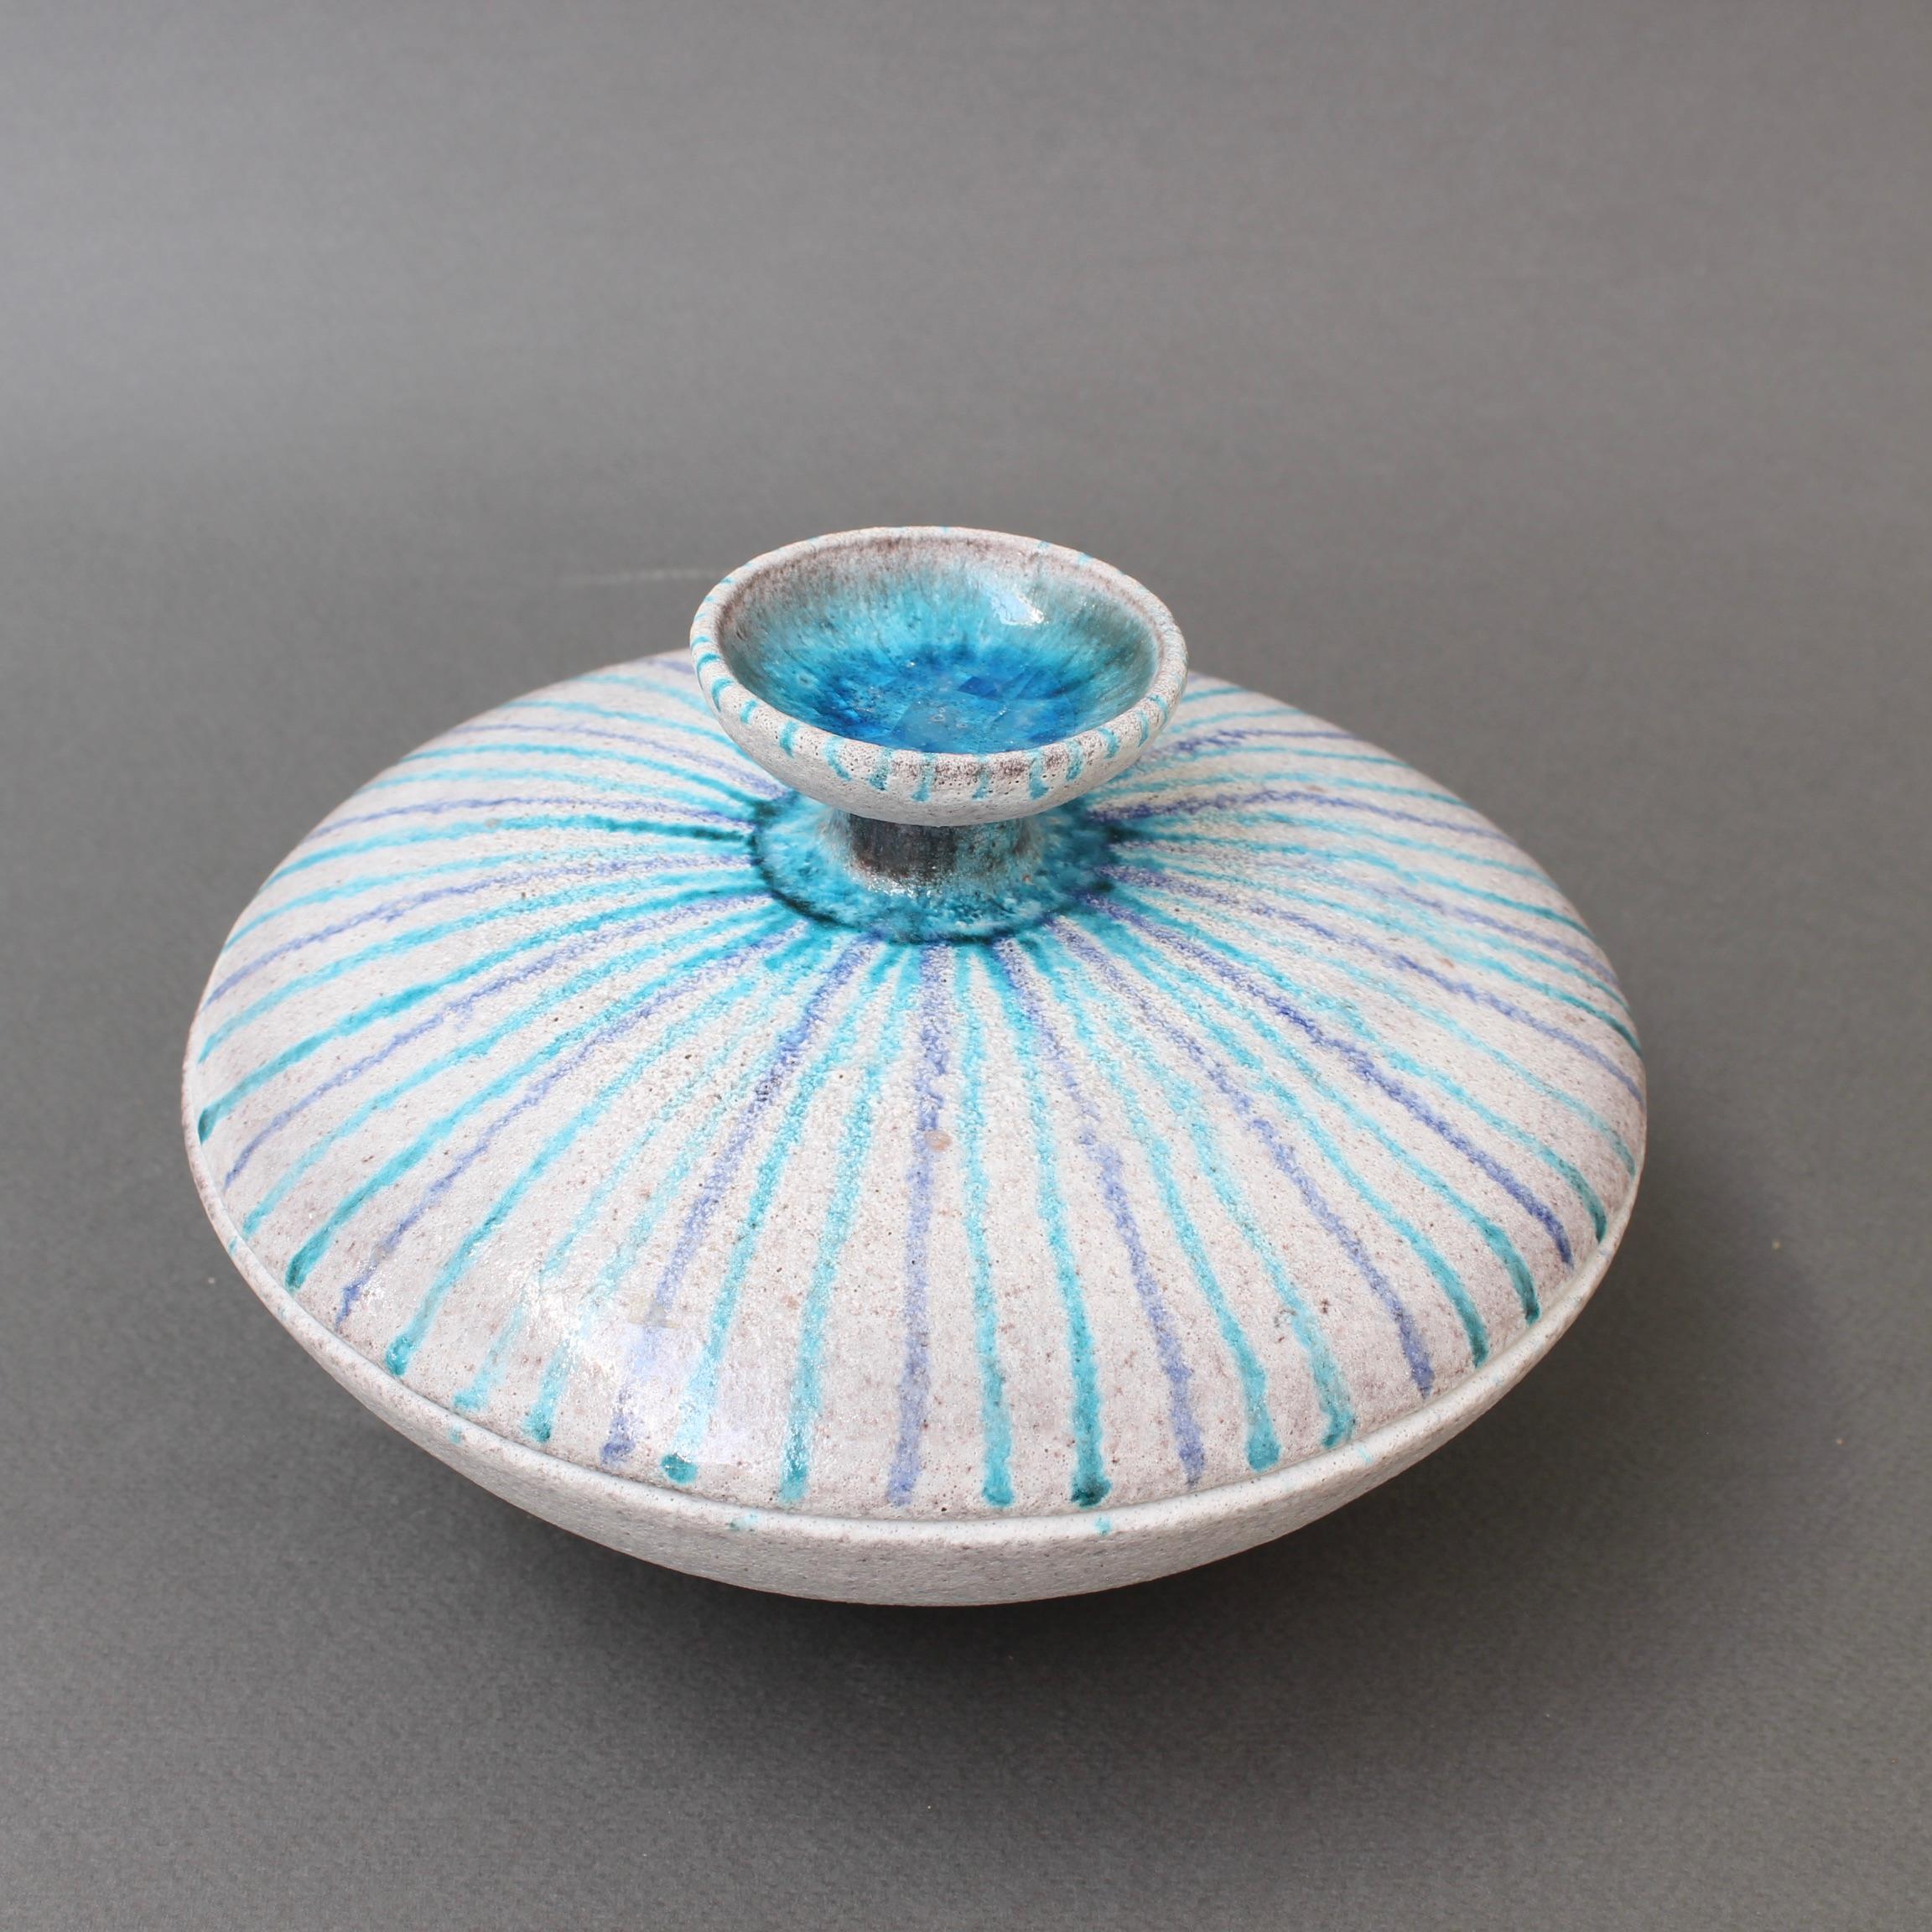 Vintage Italian Ceramic Candy Dish by Guido Gambone, circa 1950s For Sale 9